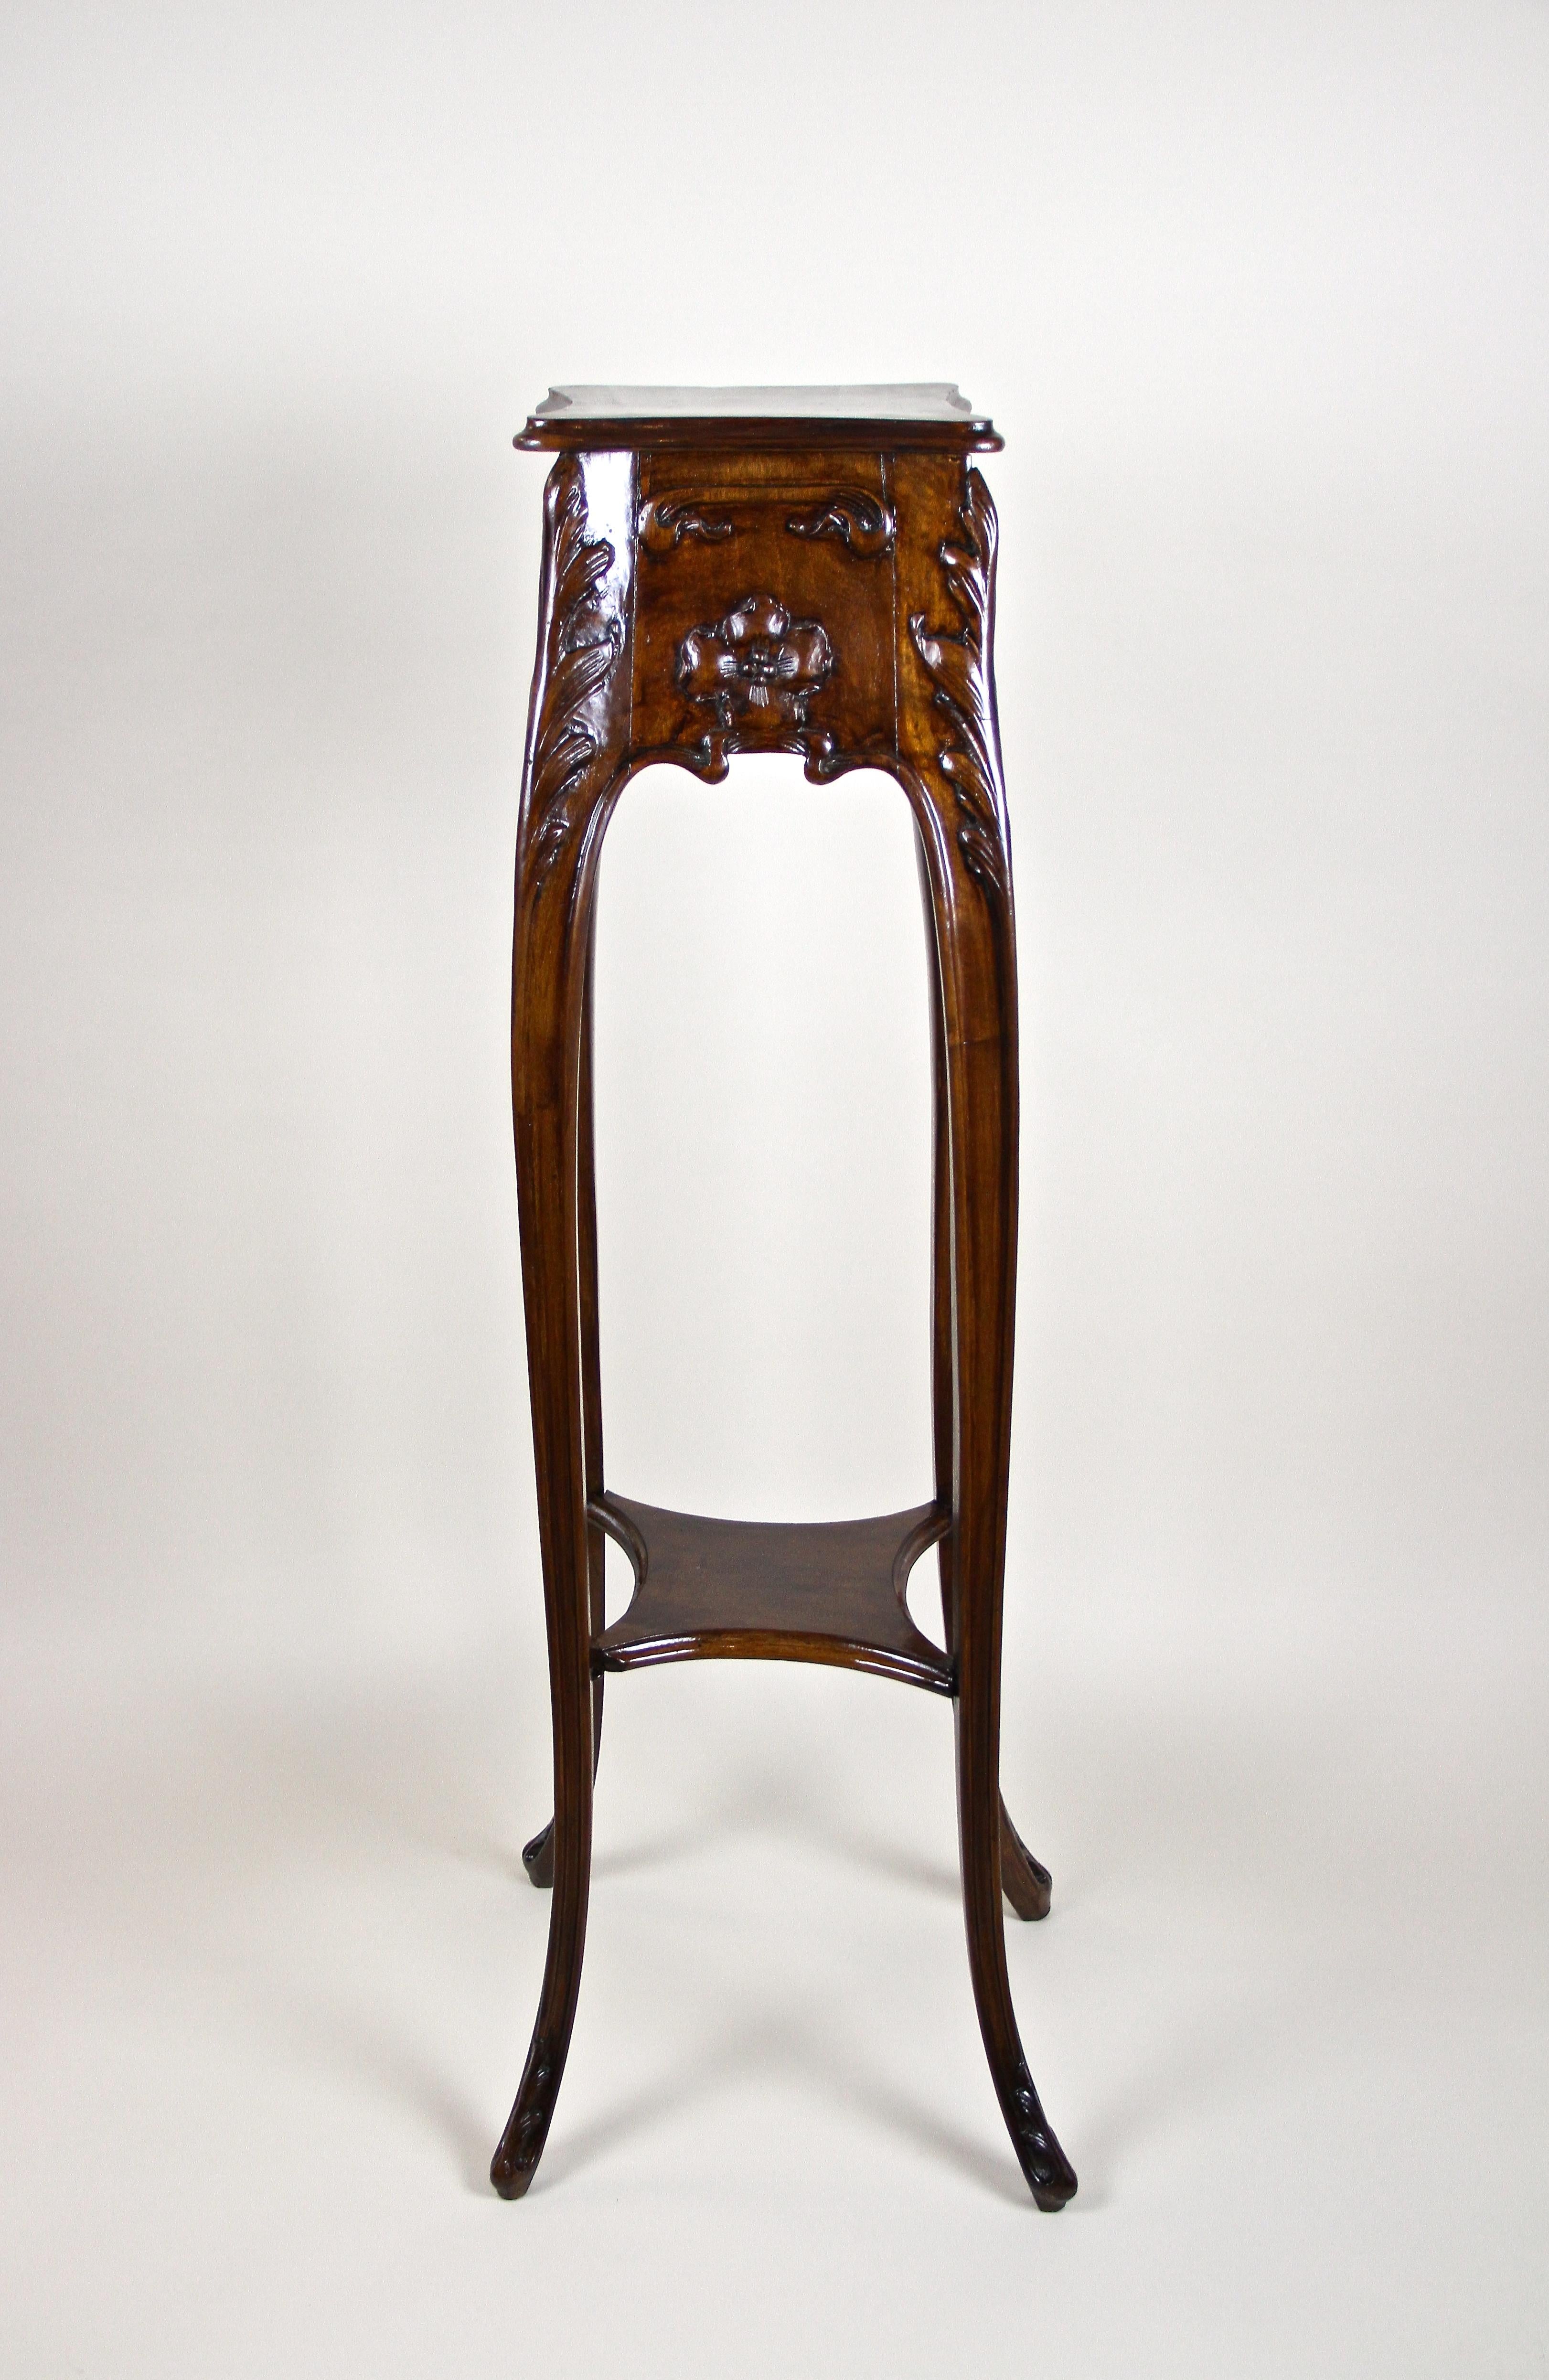 Beautiful Art Nouveau nutwood pedestal from the very early period in Austria around 1900. A unique wooden pedestal with a lovely hand carved floral design and artfully curved lines. Representing typical forms of the Art Nouveau design language, this